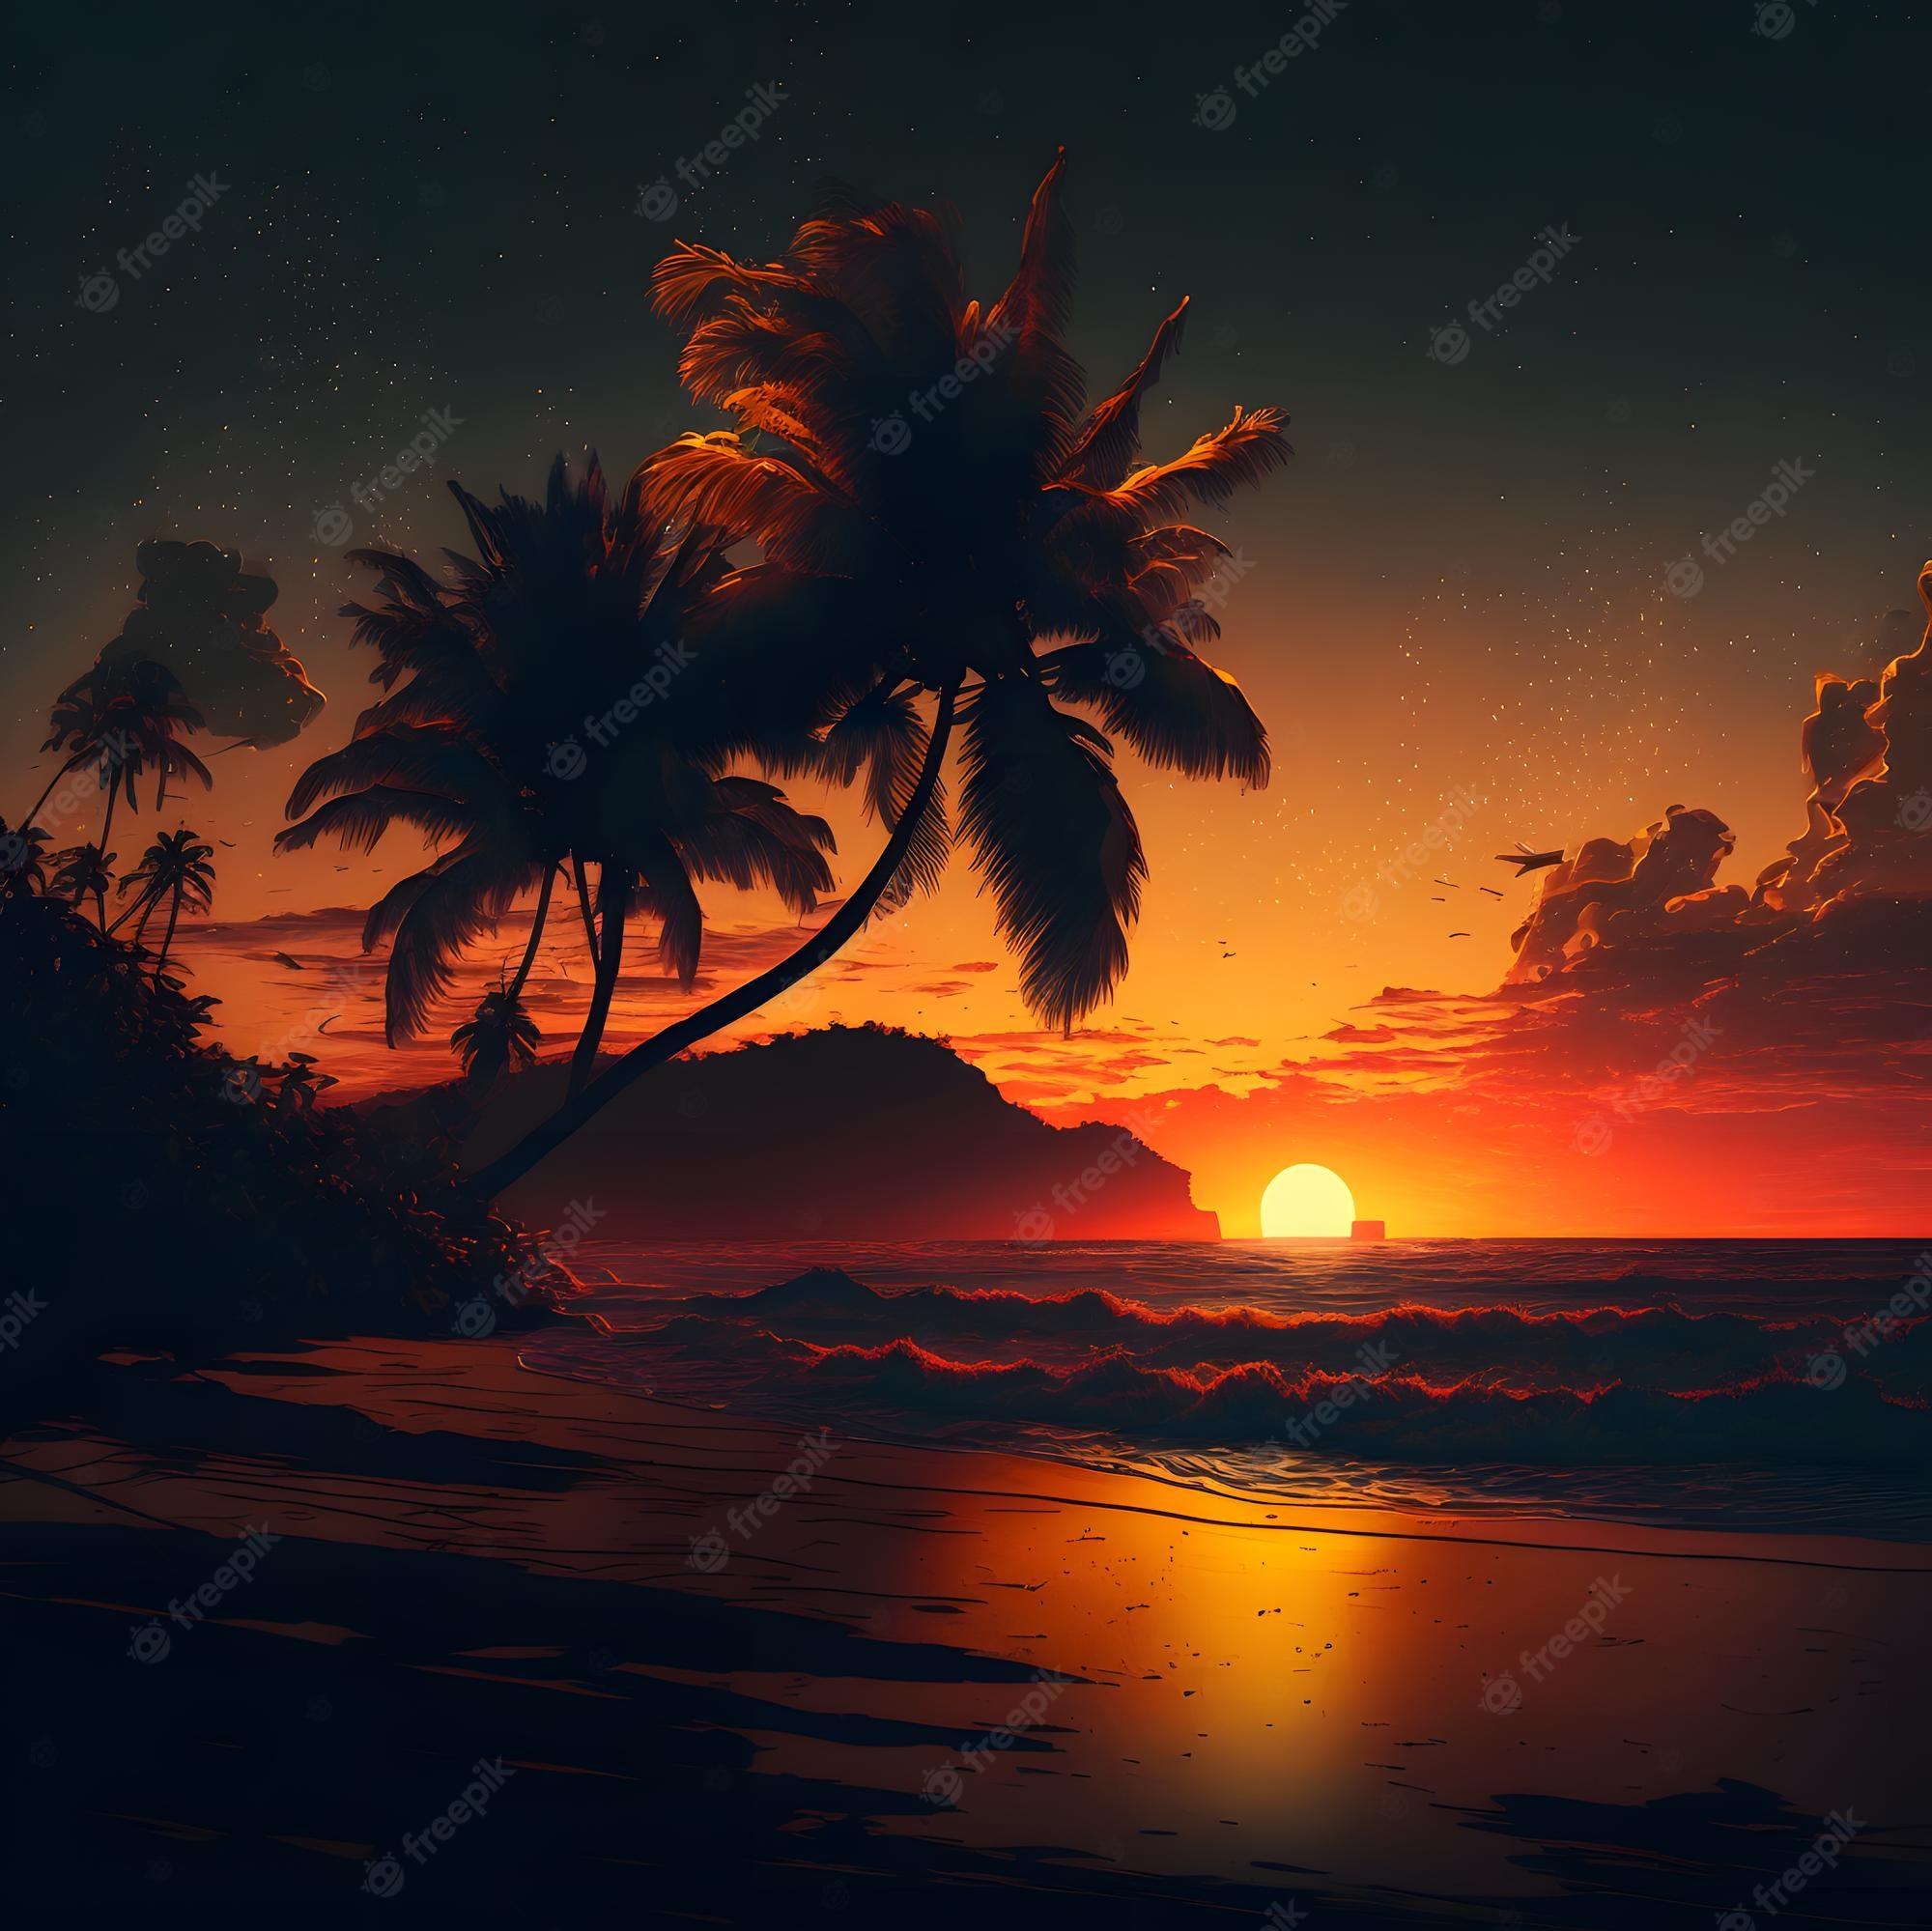 Premium Photo A sunset on the beach with palm trees and a